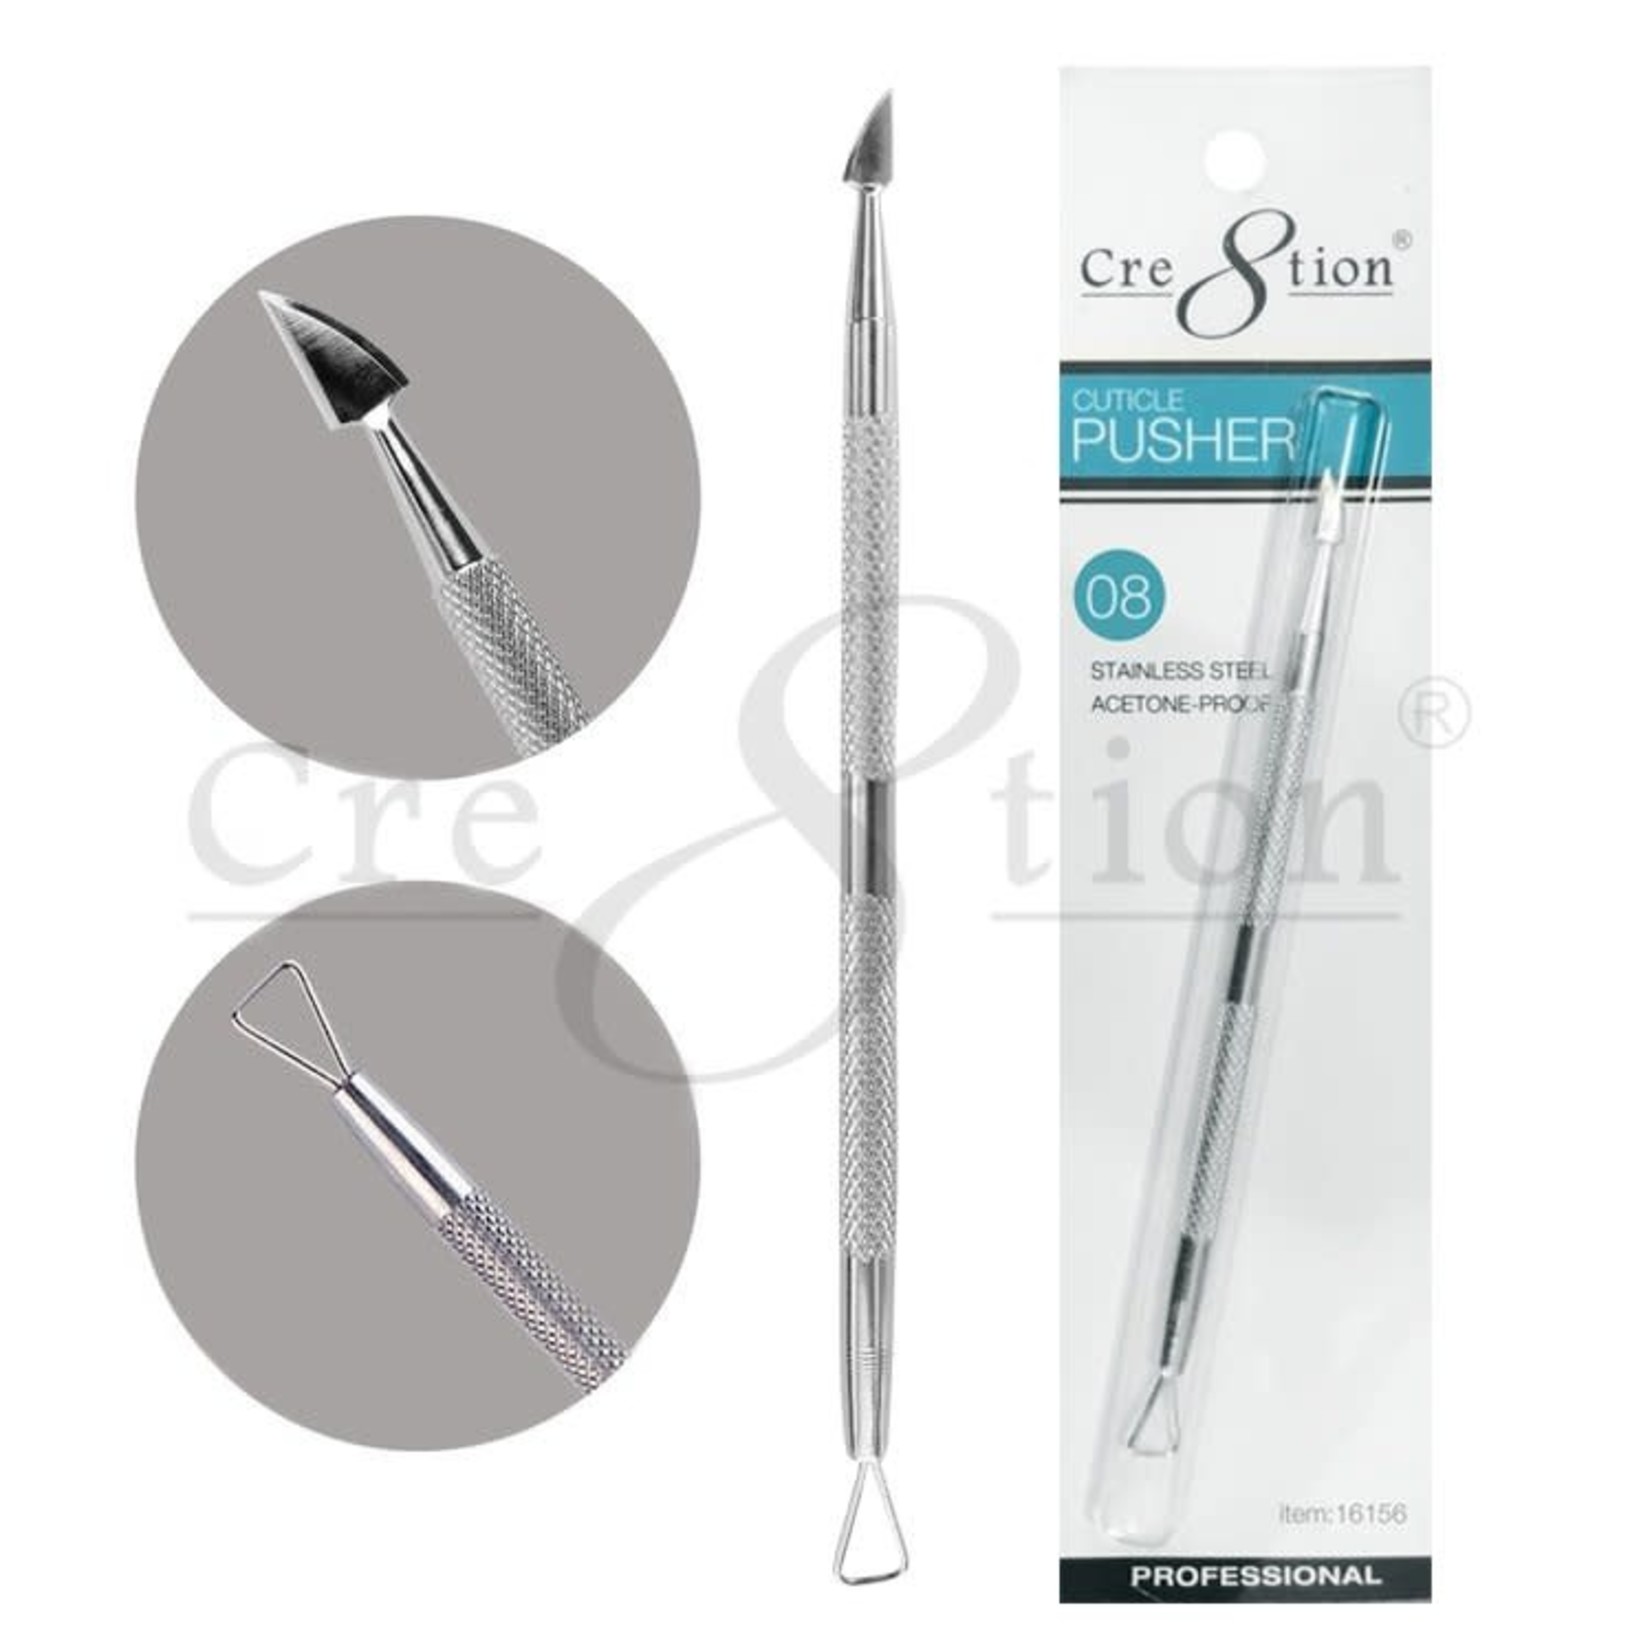 Cre8tion Cre8tion - Cuticle Pusher - 08 - 16156